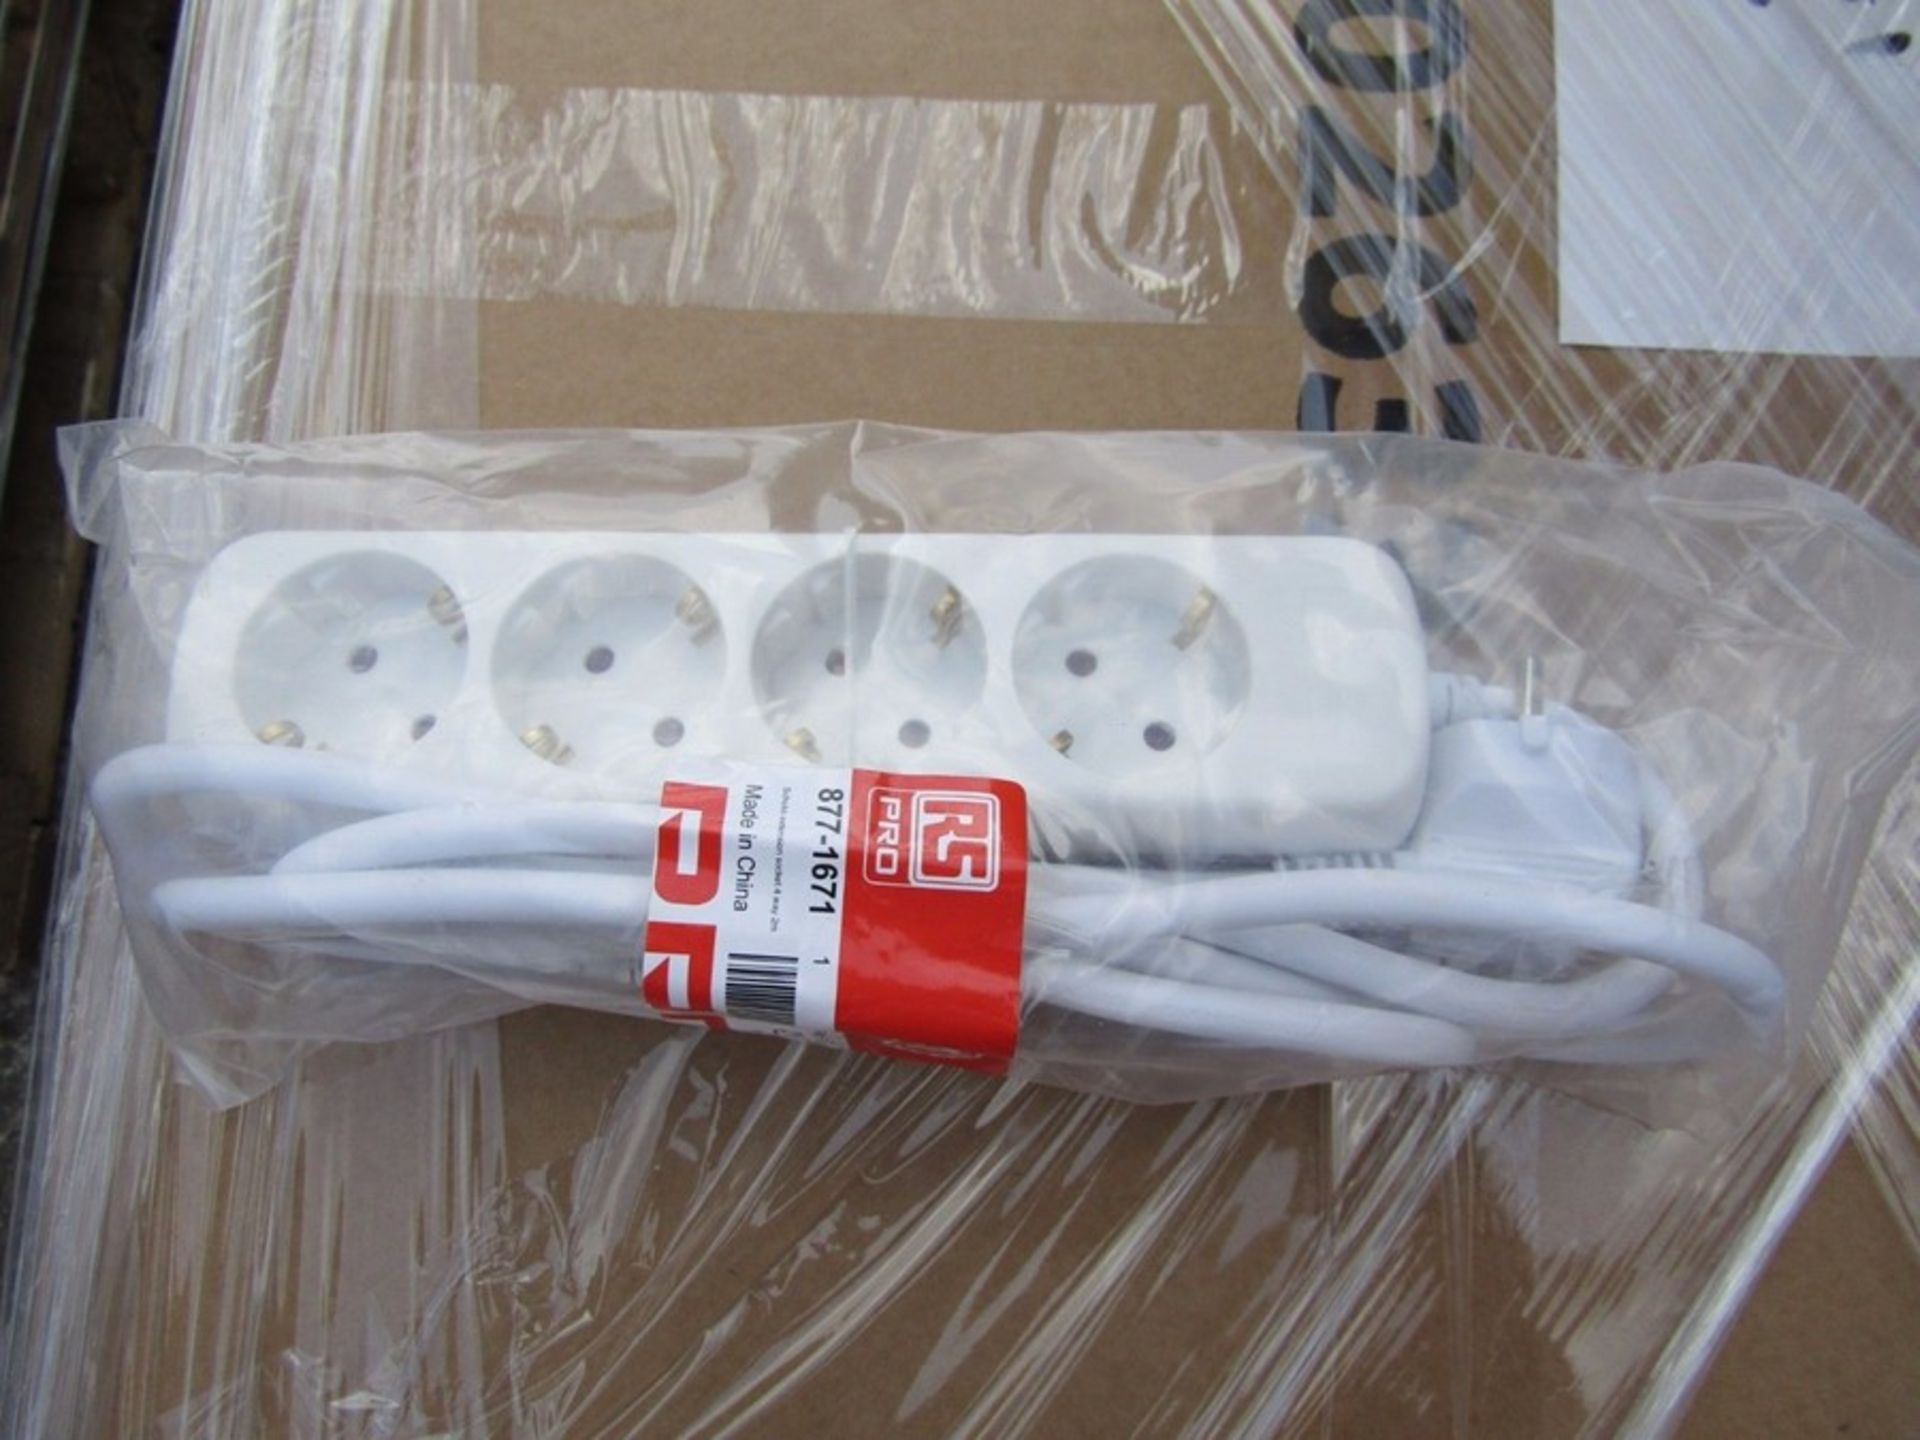 100 x Type F German 4 Way Switched Extension Sockets with CEE7/7 Plug